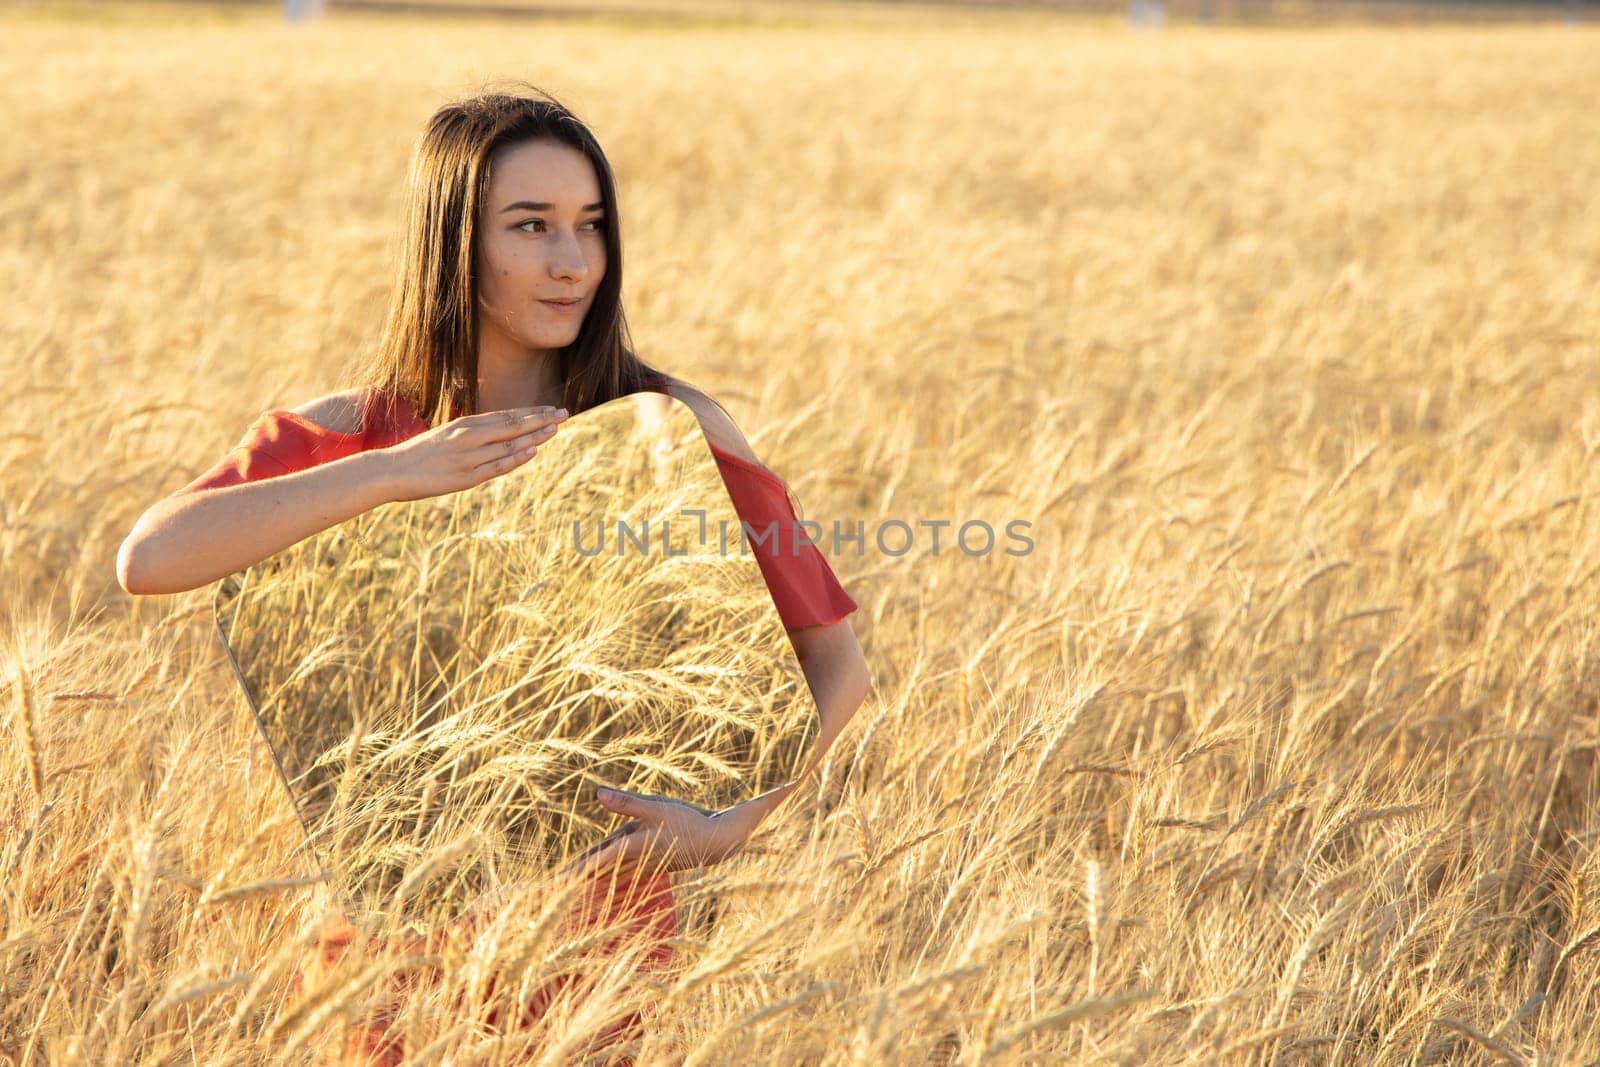 Smiling Young woman in the wheat field, holding mirror glass where reflected the dry wheat. Meditation, mental health concept. Copy space.